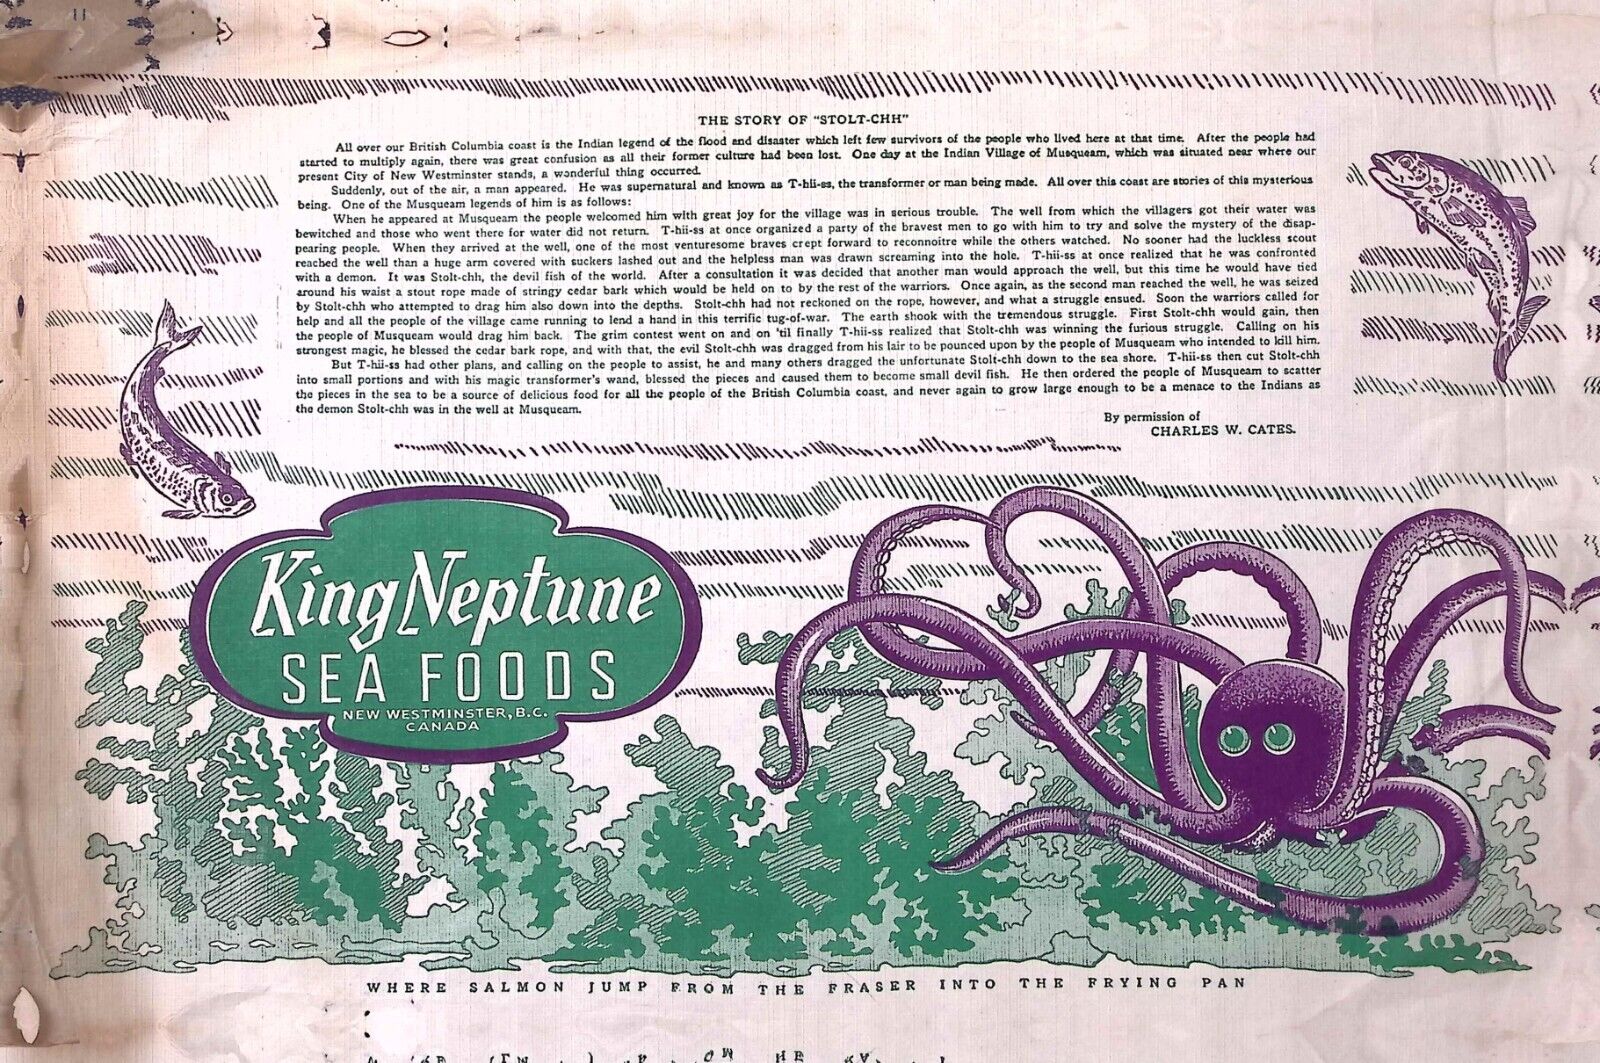 1950s KING NEPTUNE SEA FOODS NEW WESTMINSTER B.C. ADVERTISING PLACEMAT MENU W63